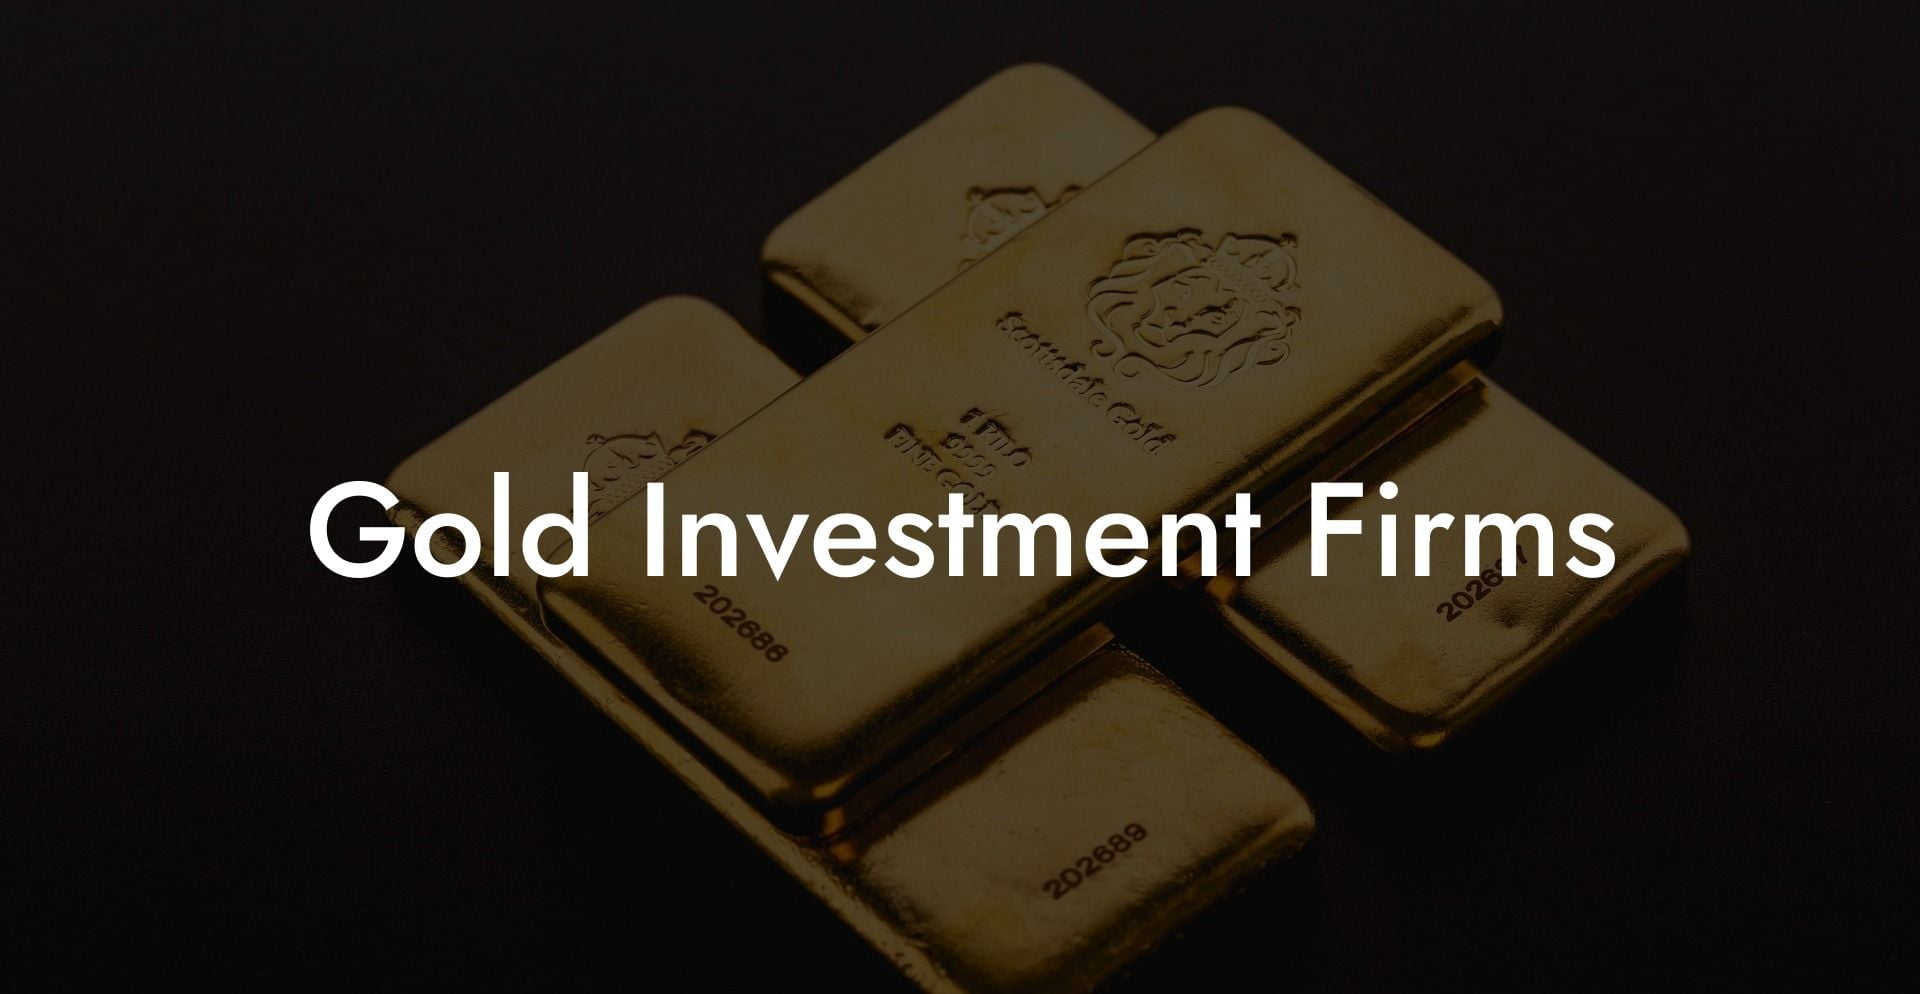 Gold Investment Firms